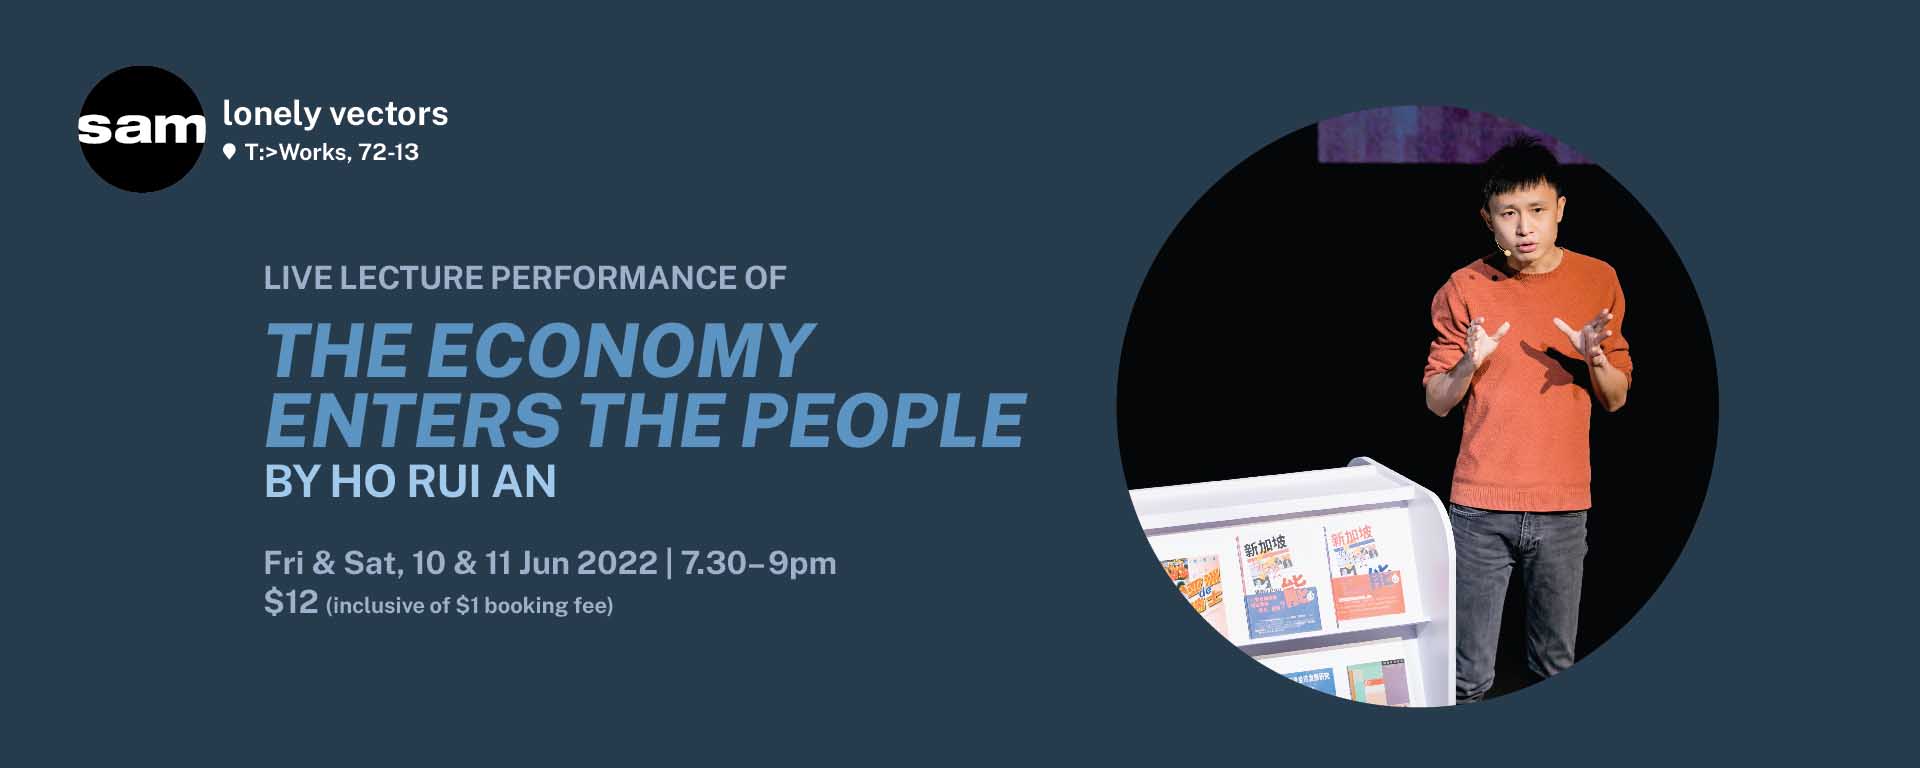 Live lecture performance of The Economy Enters the People by Ho Rui An